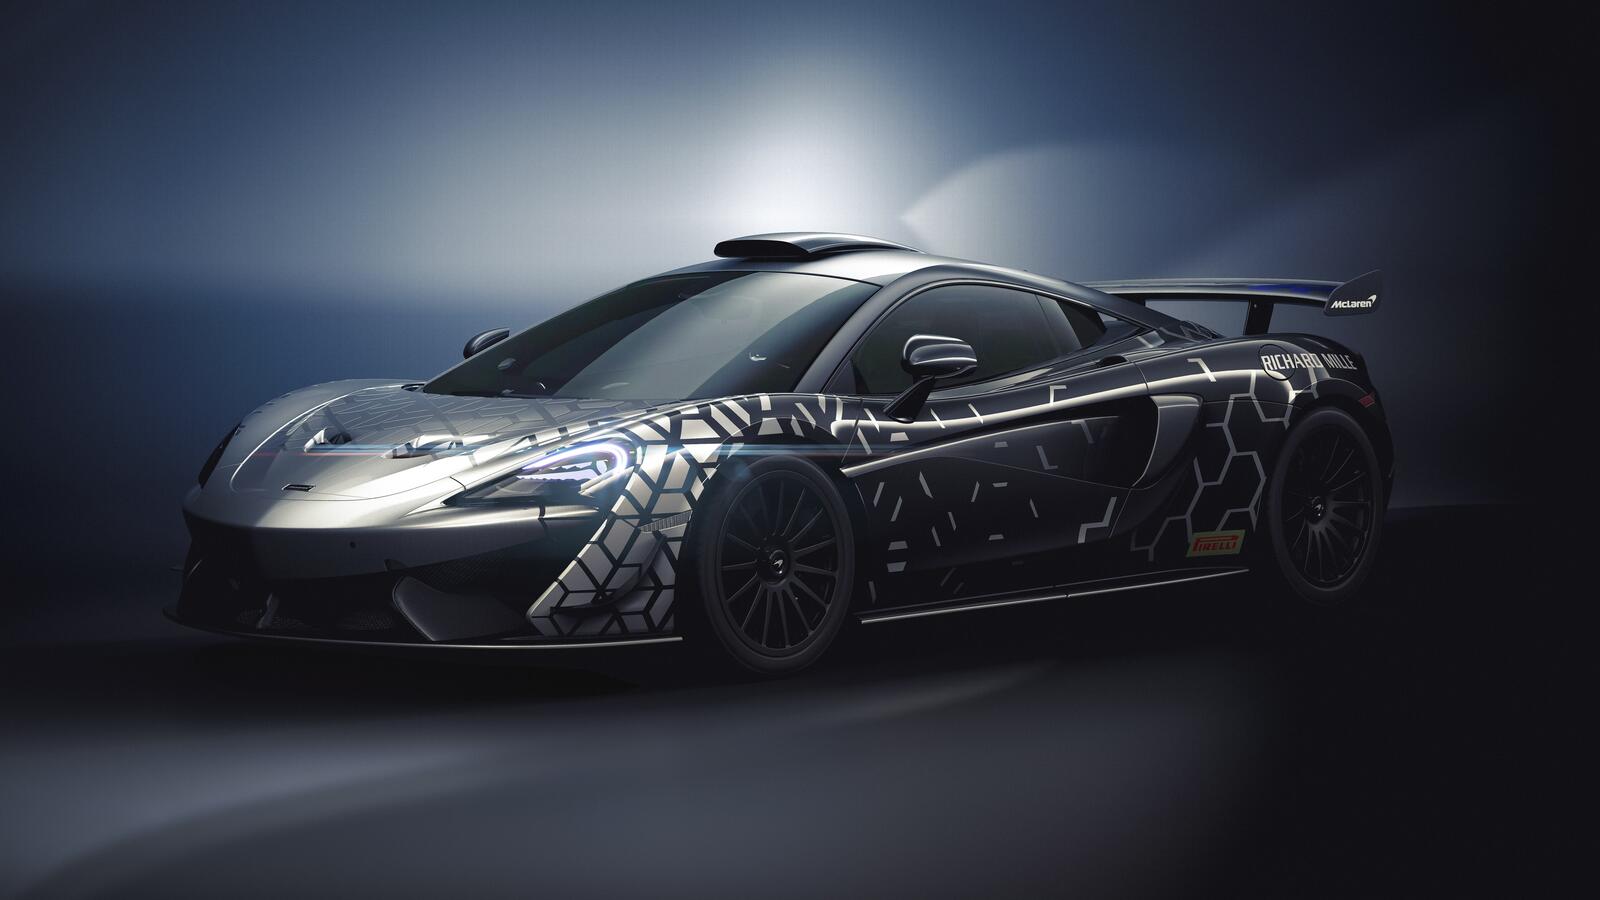 Free photo Mclaren 620r special edition with stickers